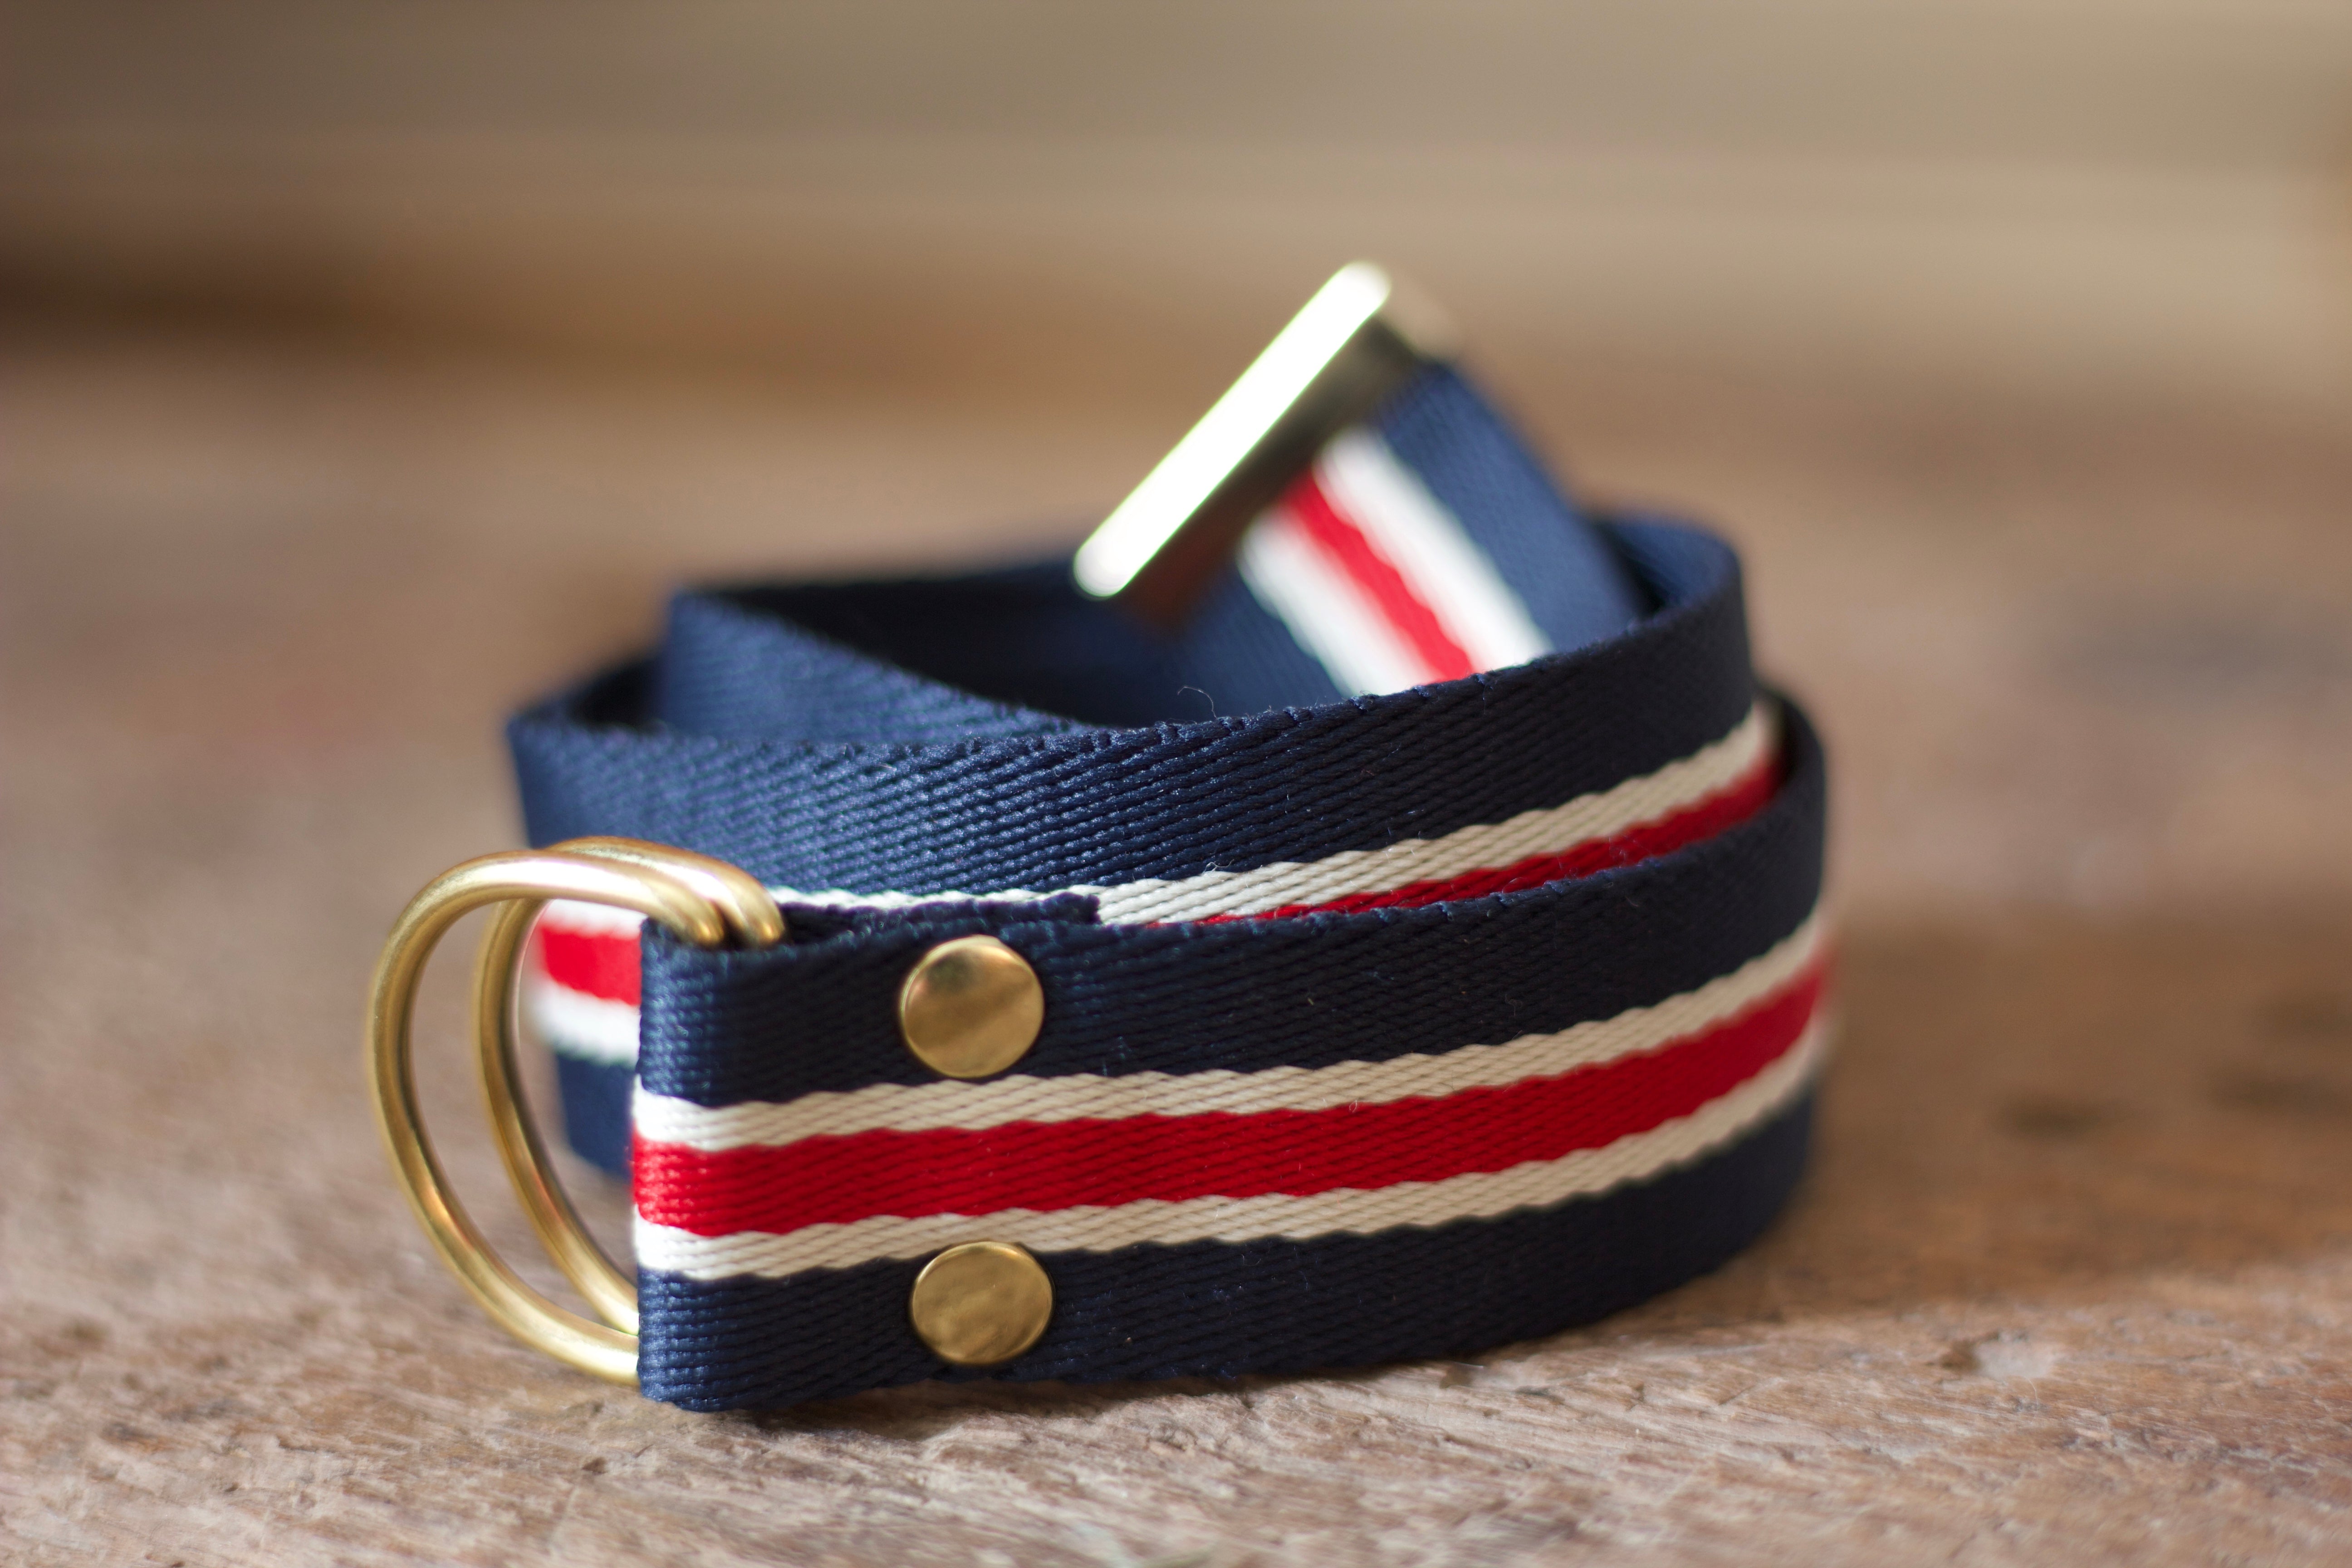 Webbing Strap in Navy with Red & White